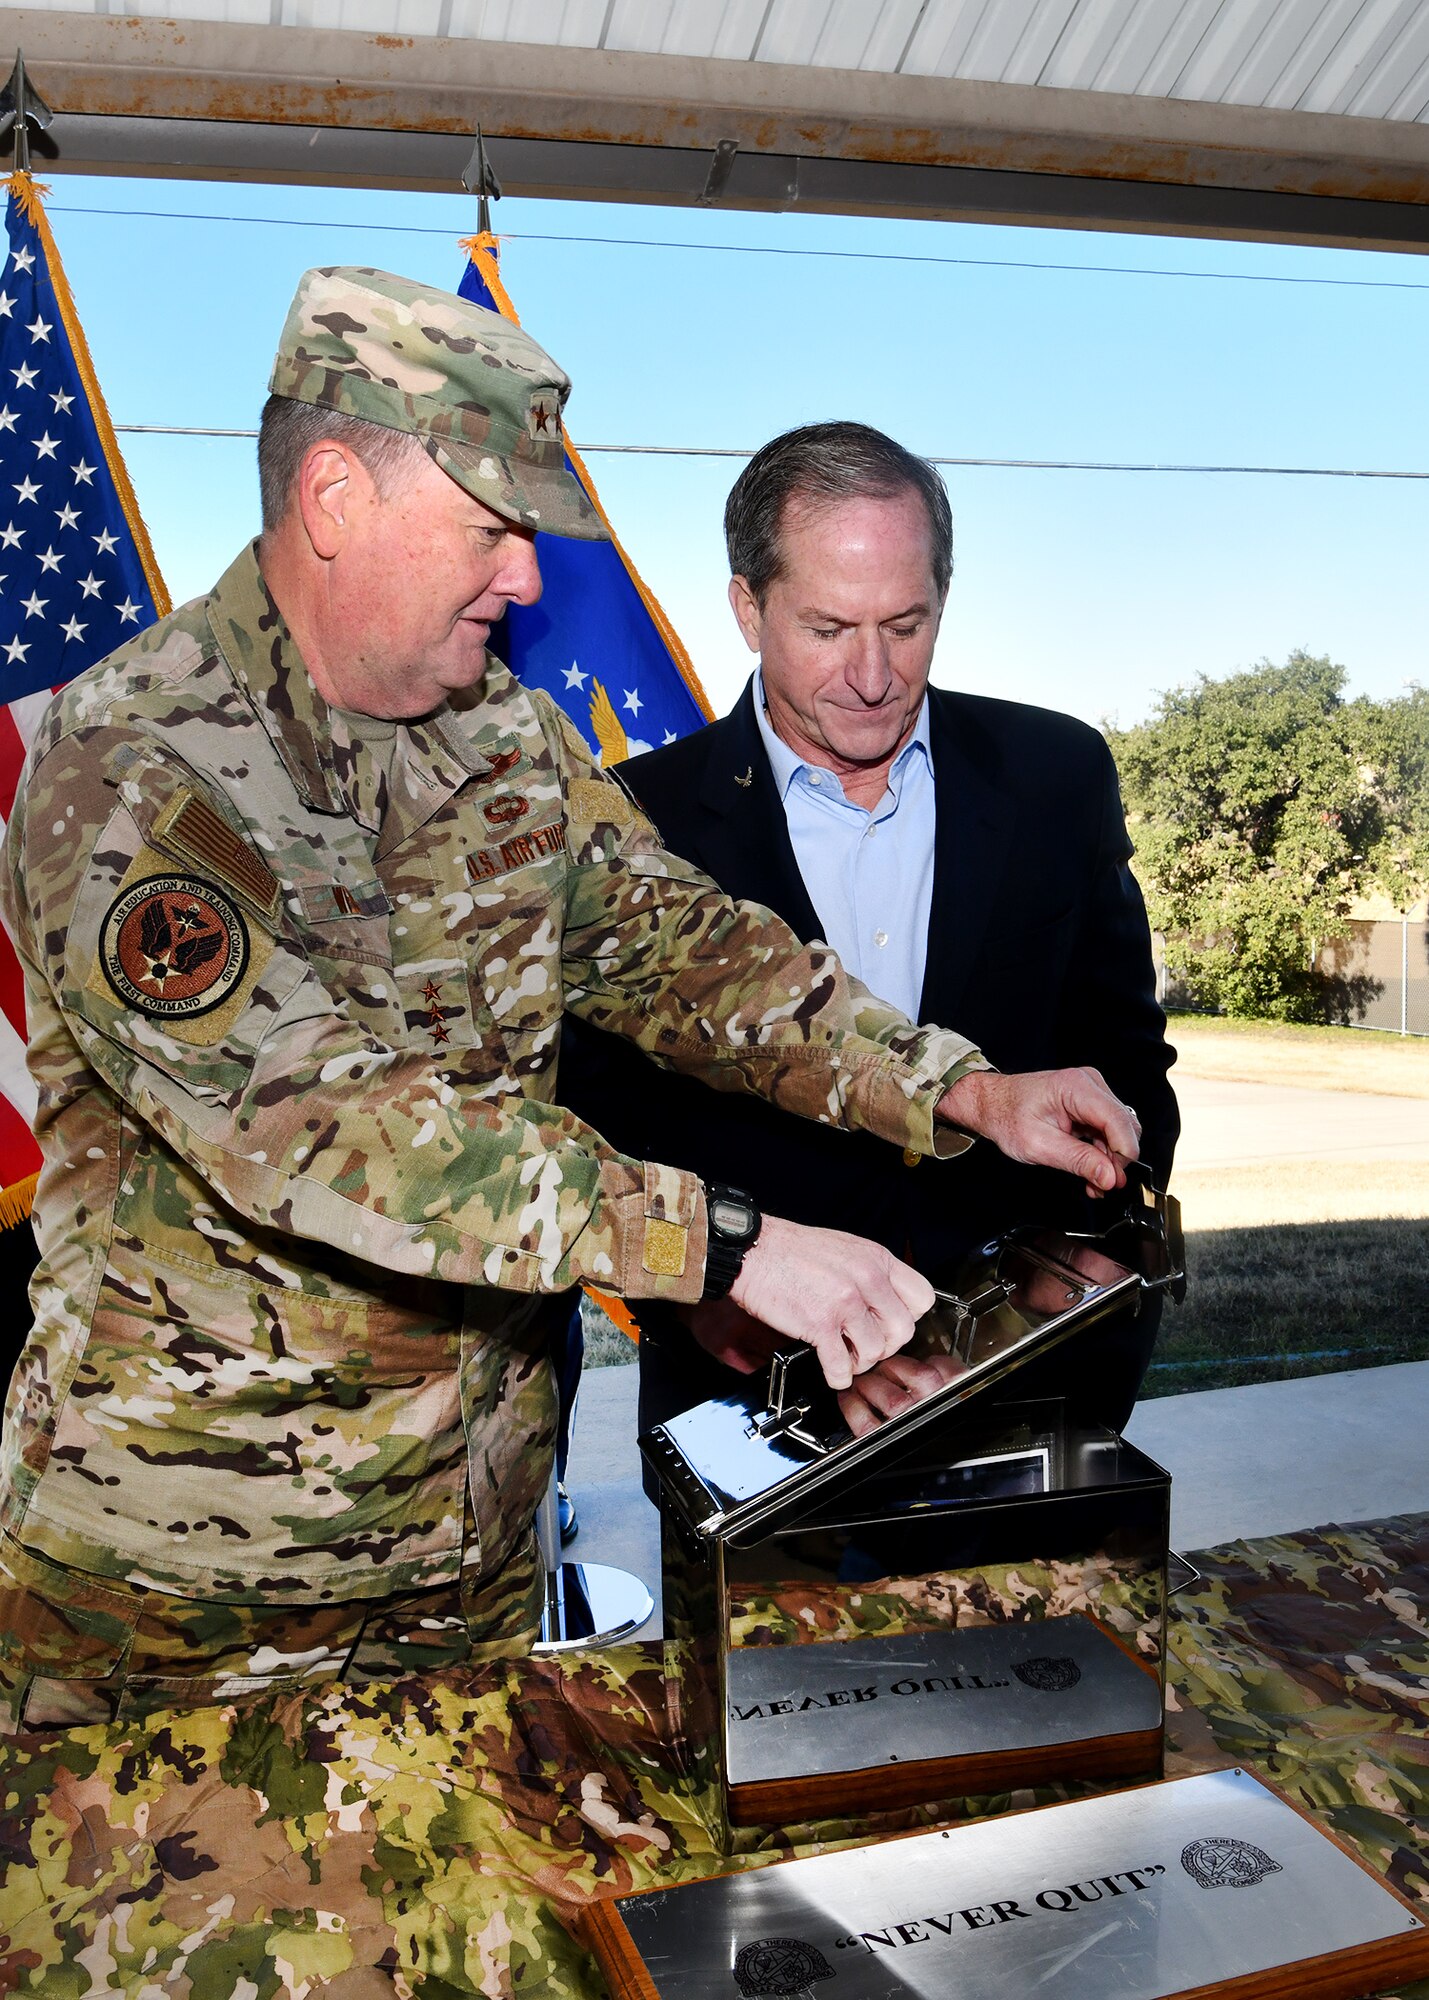 U.S. Air Force Lt. Gen. Marshall B. Webb (left), Commander, Air Education and Training Command, Joint Base San Antonio-Randolph, Texas, and former U.S. Air Force Chief of Staff Gen. David Goldfein (ret.) (right) seal the SWTW aquatics training center heritage capsule while standing in front of the future site of the Special Warfare Training Wing aquatics training facility